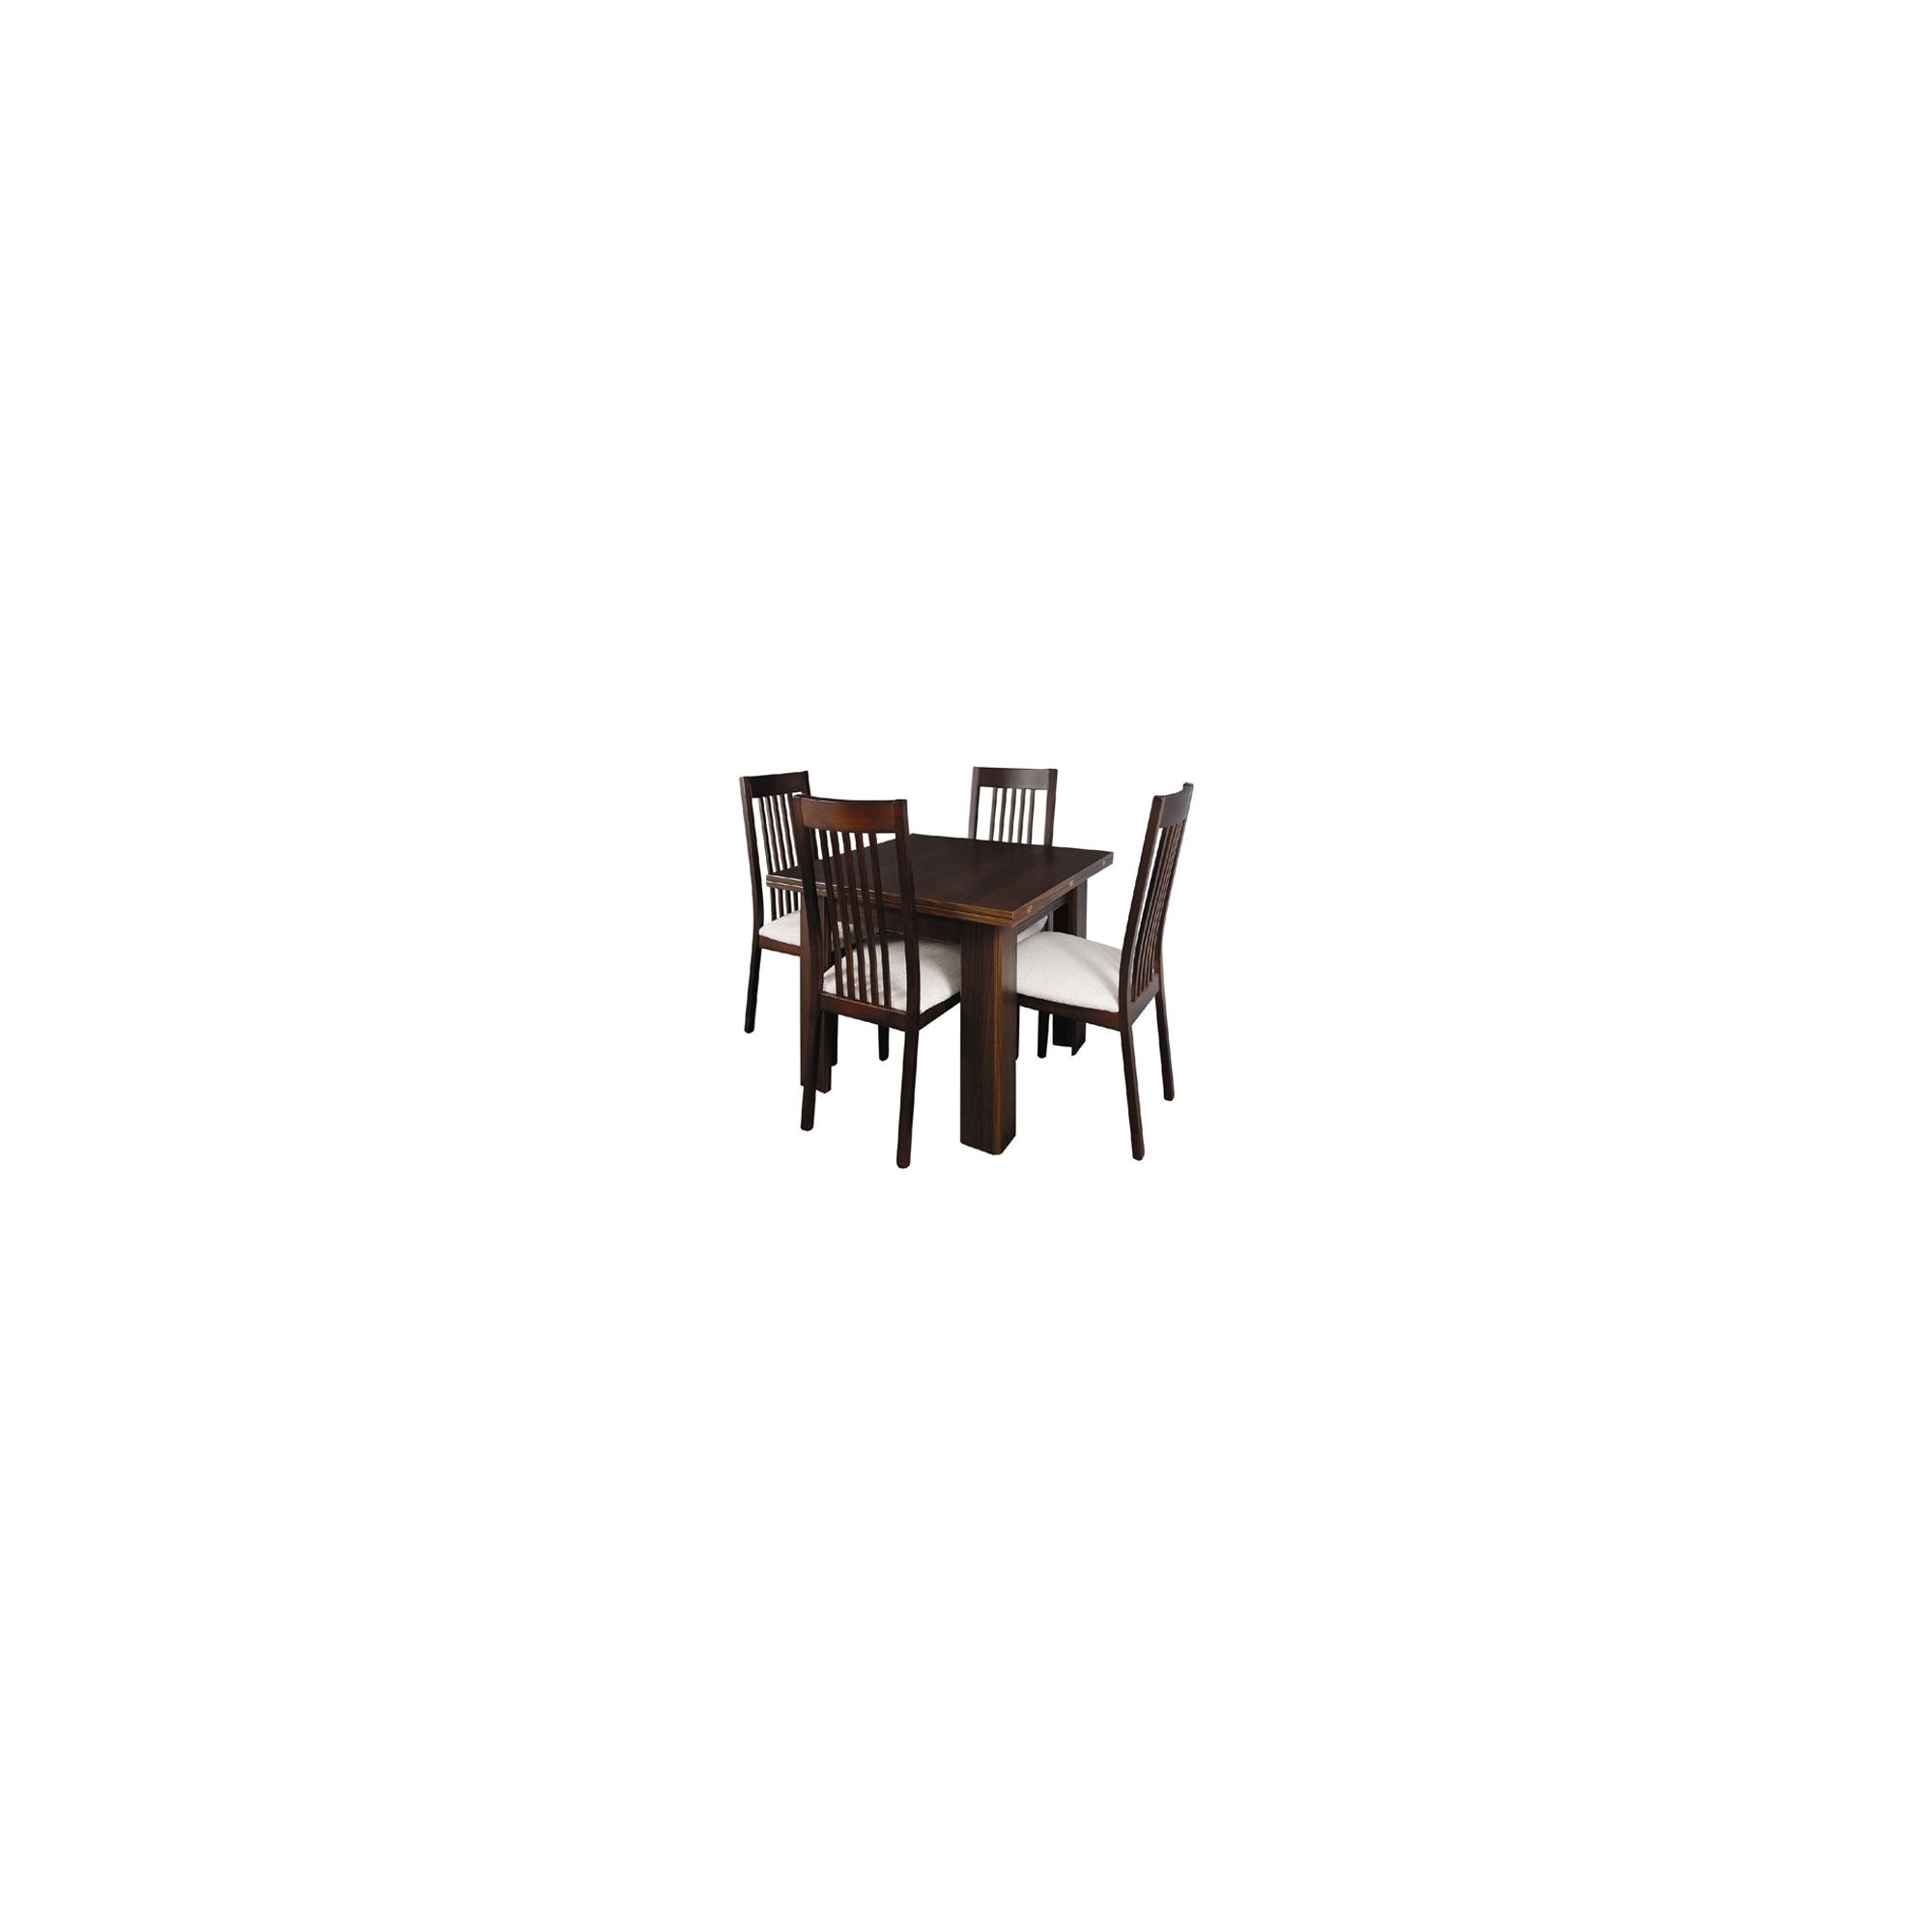 Caxton Royale Butterfly Extending 4 Chair Dining Set in Dark Oak at Tesco Direct